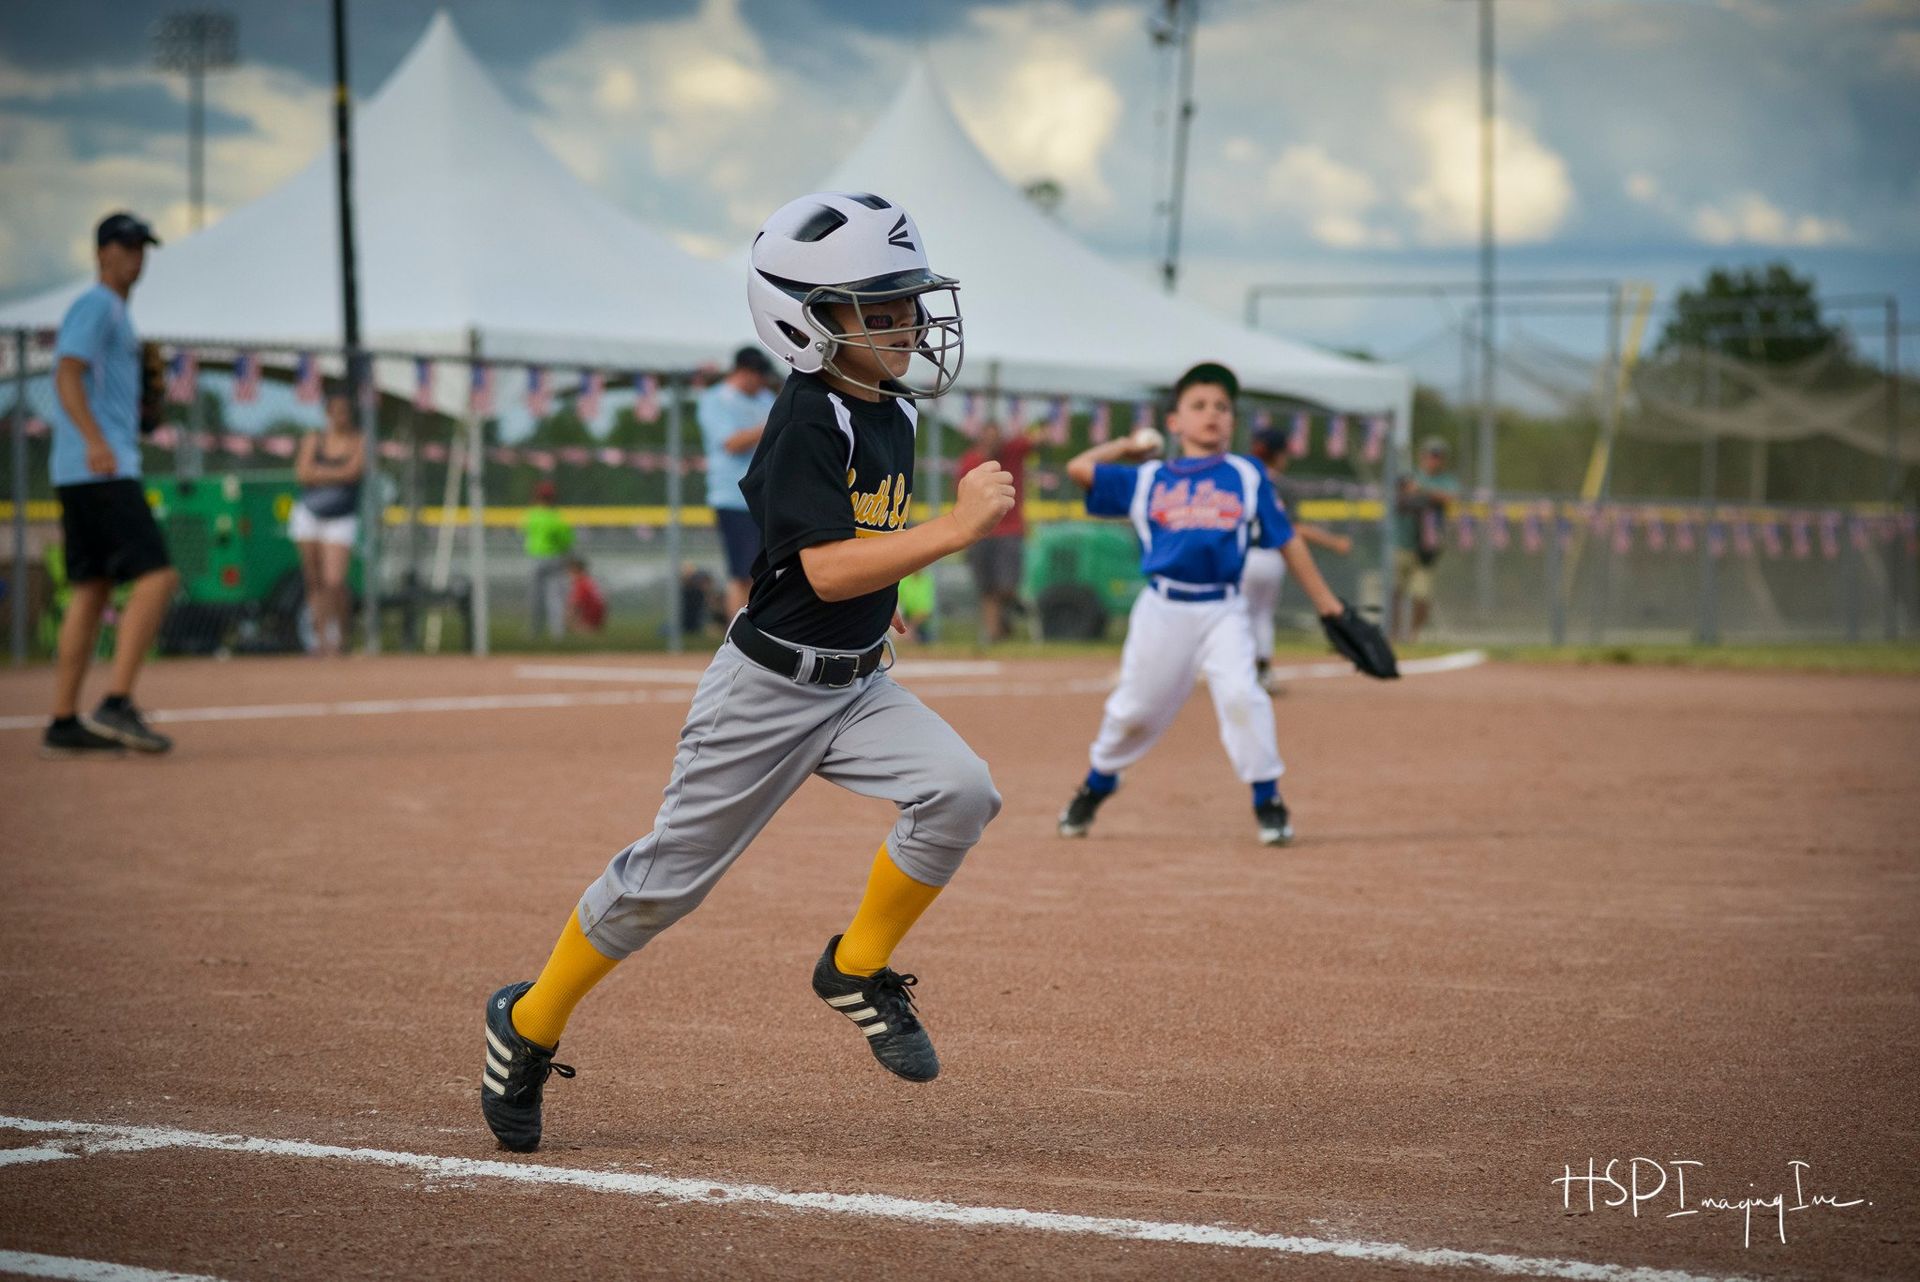 How to take kids sports photos with your phone #HSPImaging 